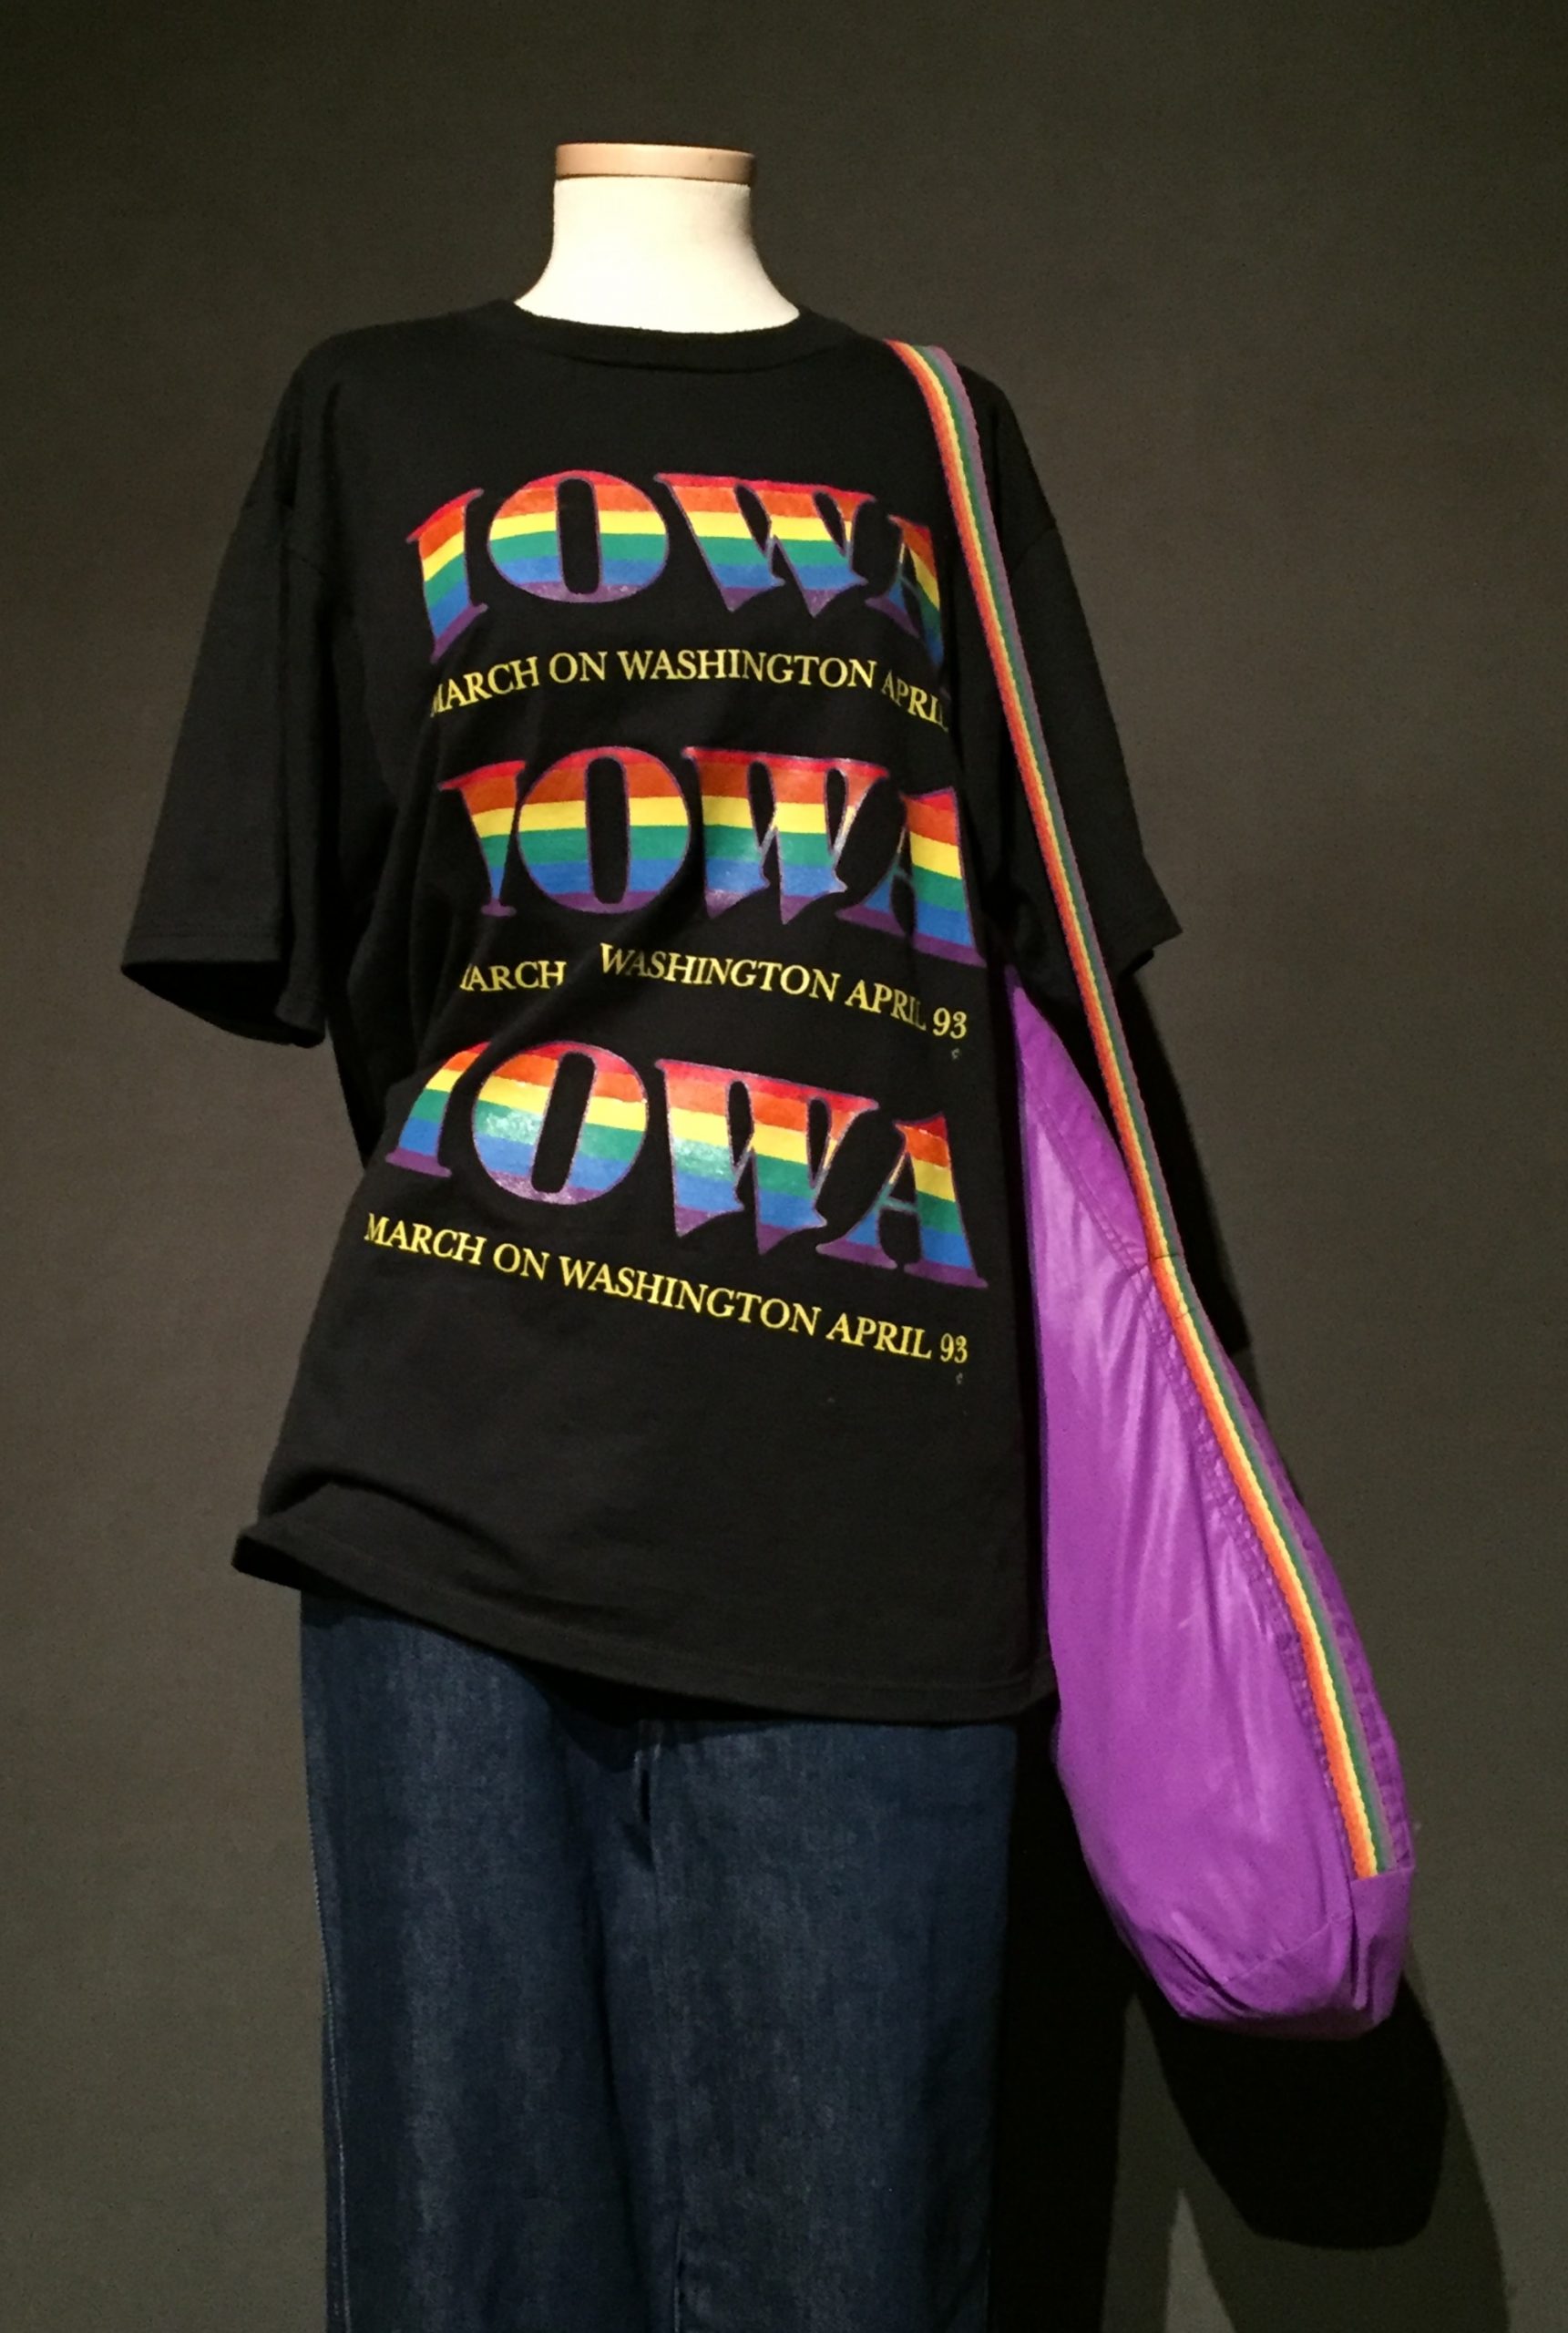 Black short sleeve t-shirt with rainbow lettering reading: "Iowa: March on Washington 93", cuffed denim pants, and purple bag with rainbow strap